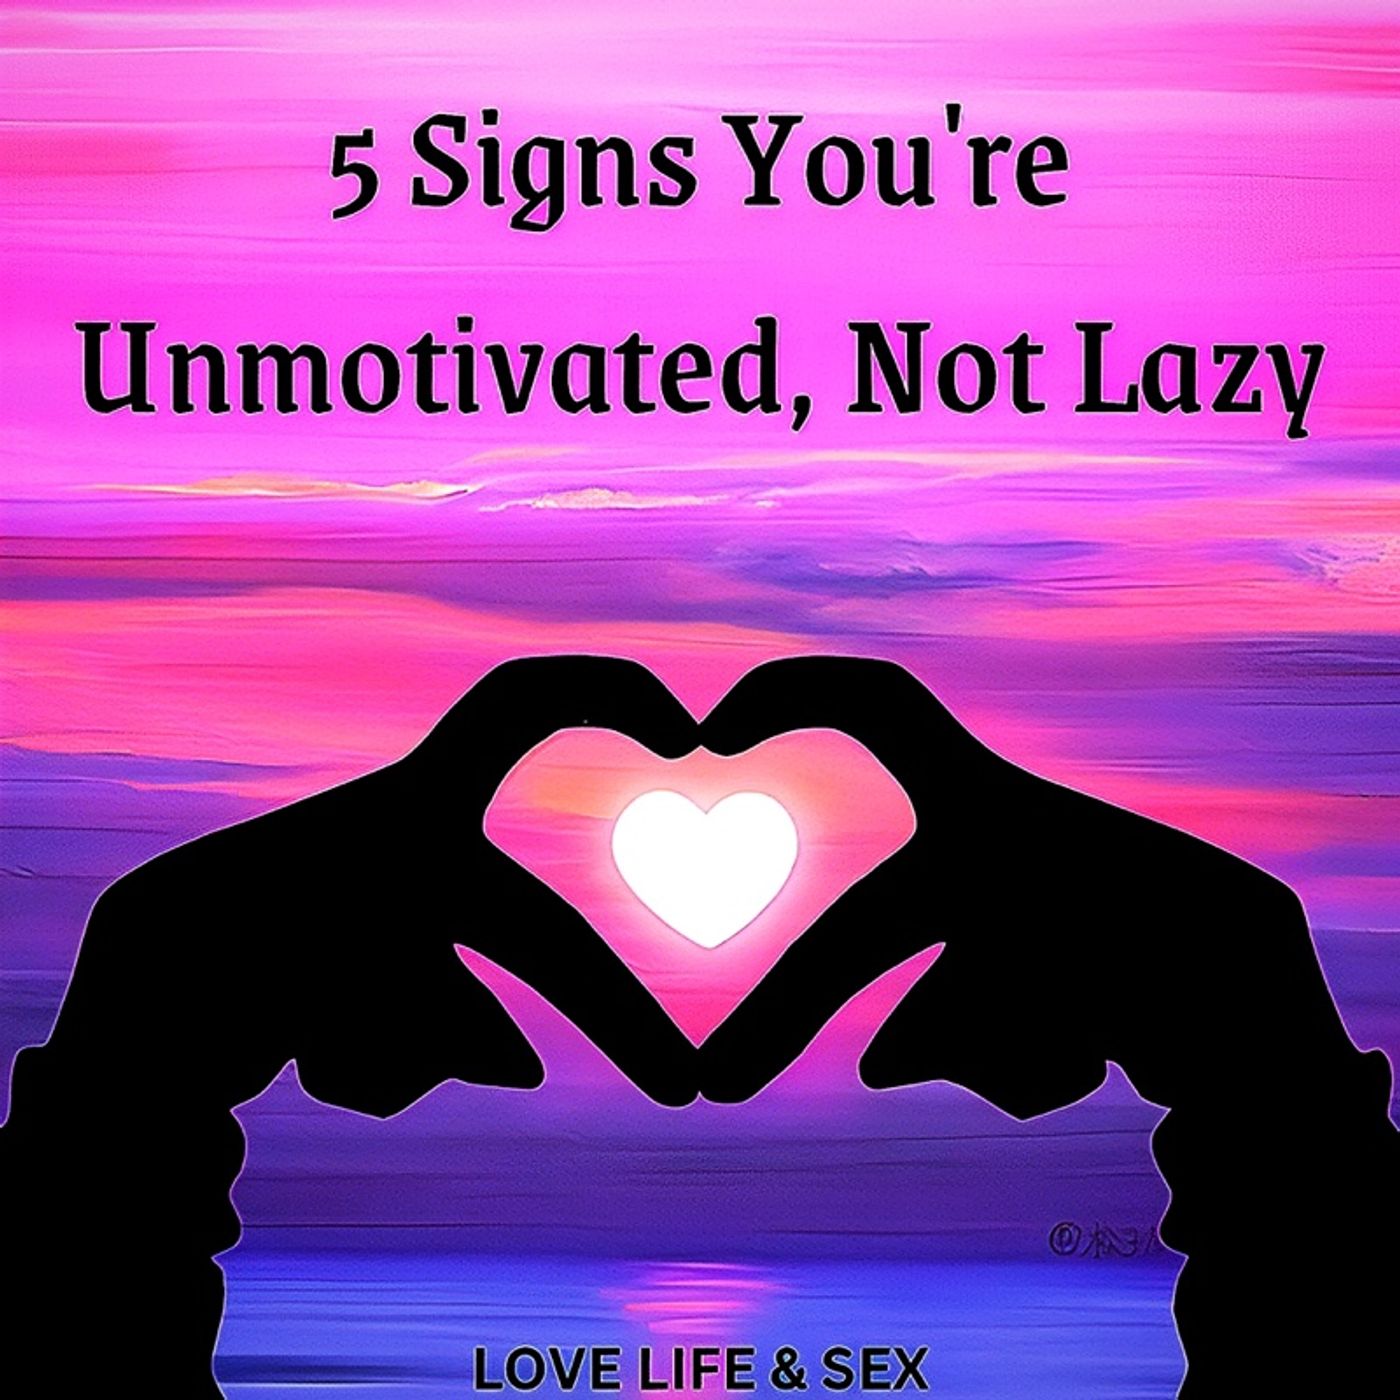 5 Signs You're Unmotivated ☹️, Not Lazy